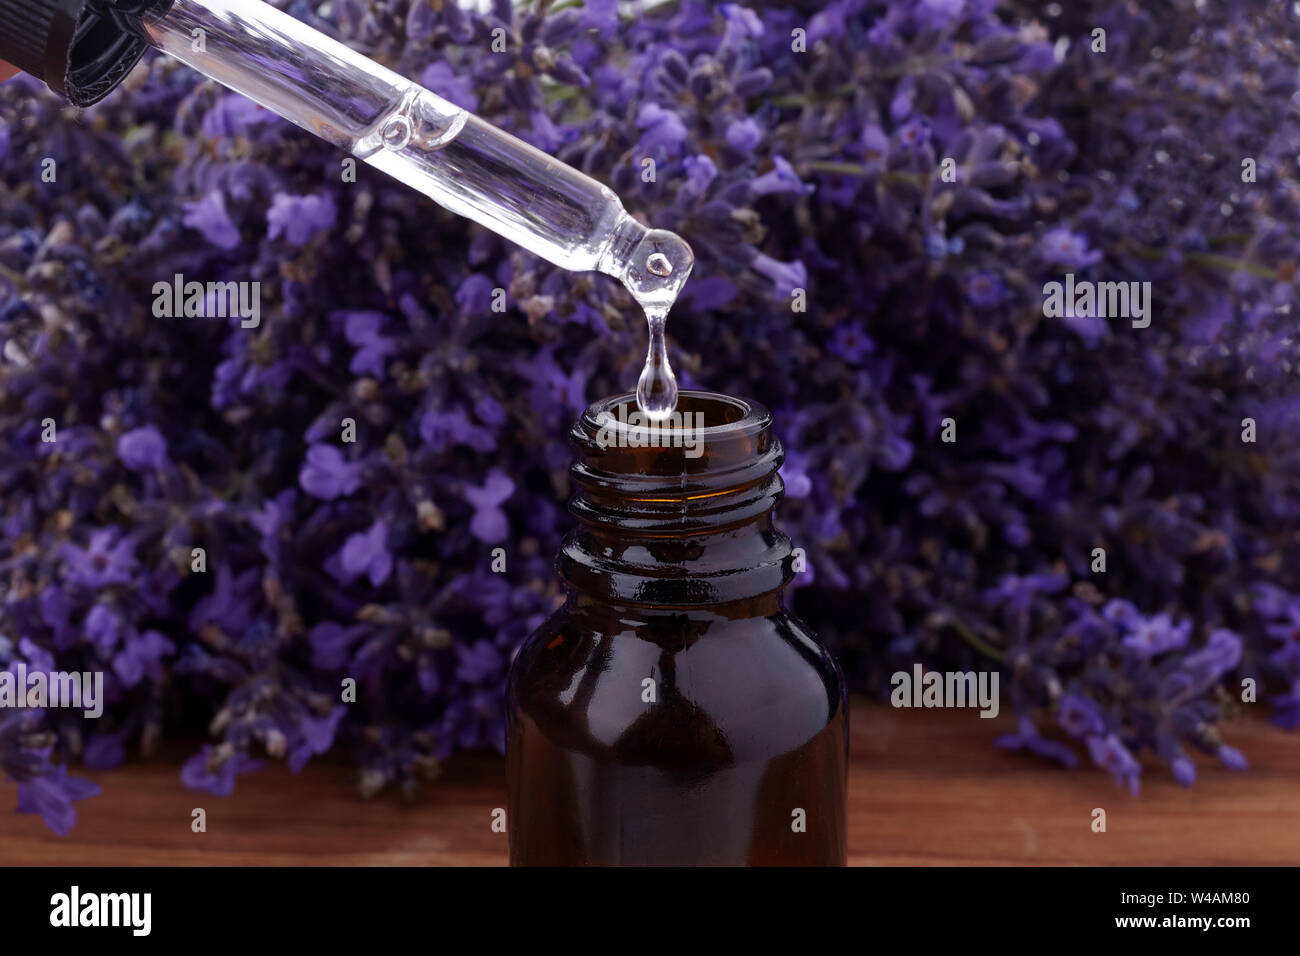 Pipette dropping essential oil into a glass bottle on lavender background. Close up Stock Photo